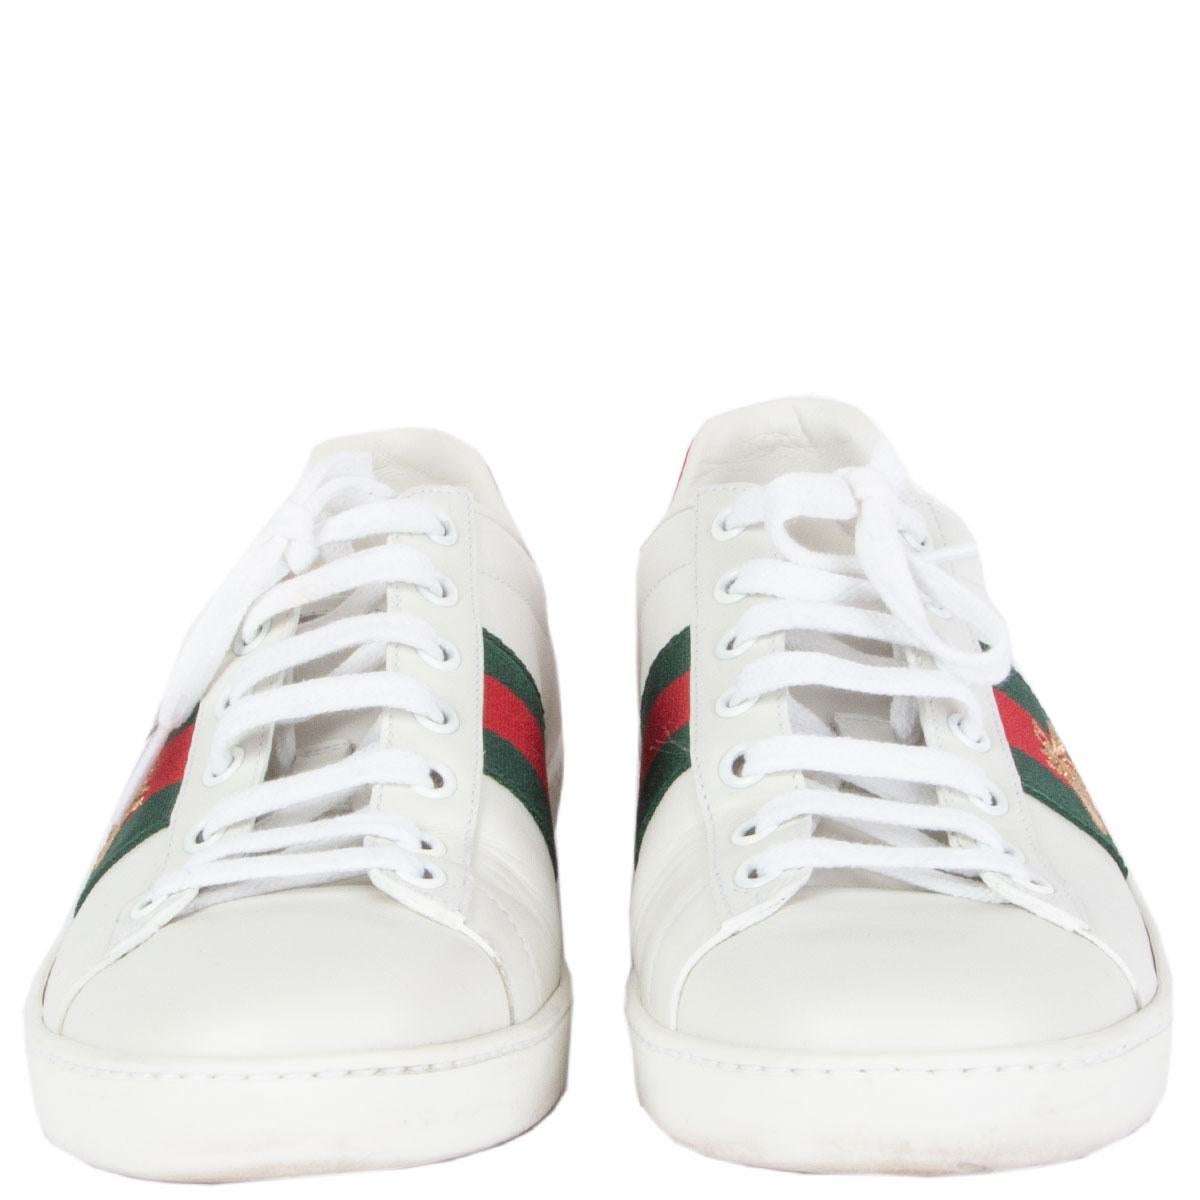 100% authentic Gucci Ace Bee sneakers in white leather features the label's signature stripes at the side with a gold metallic embroidered bee. Panels of shining snakeskin in red and green at the heels. Have been worn and are in excellent condition.